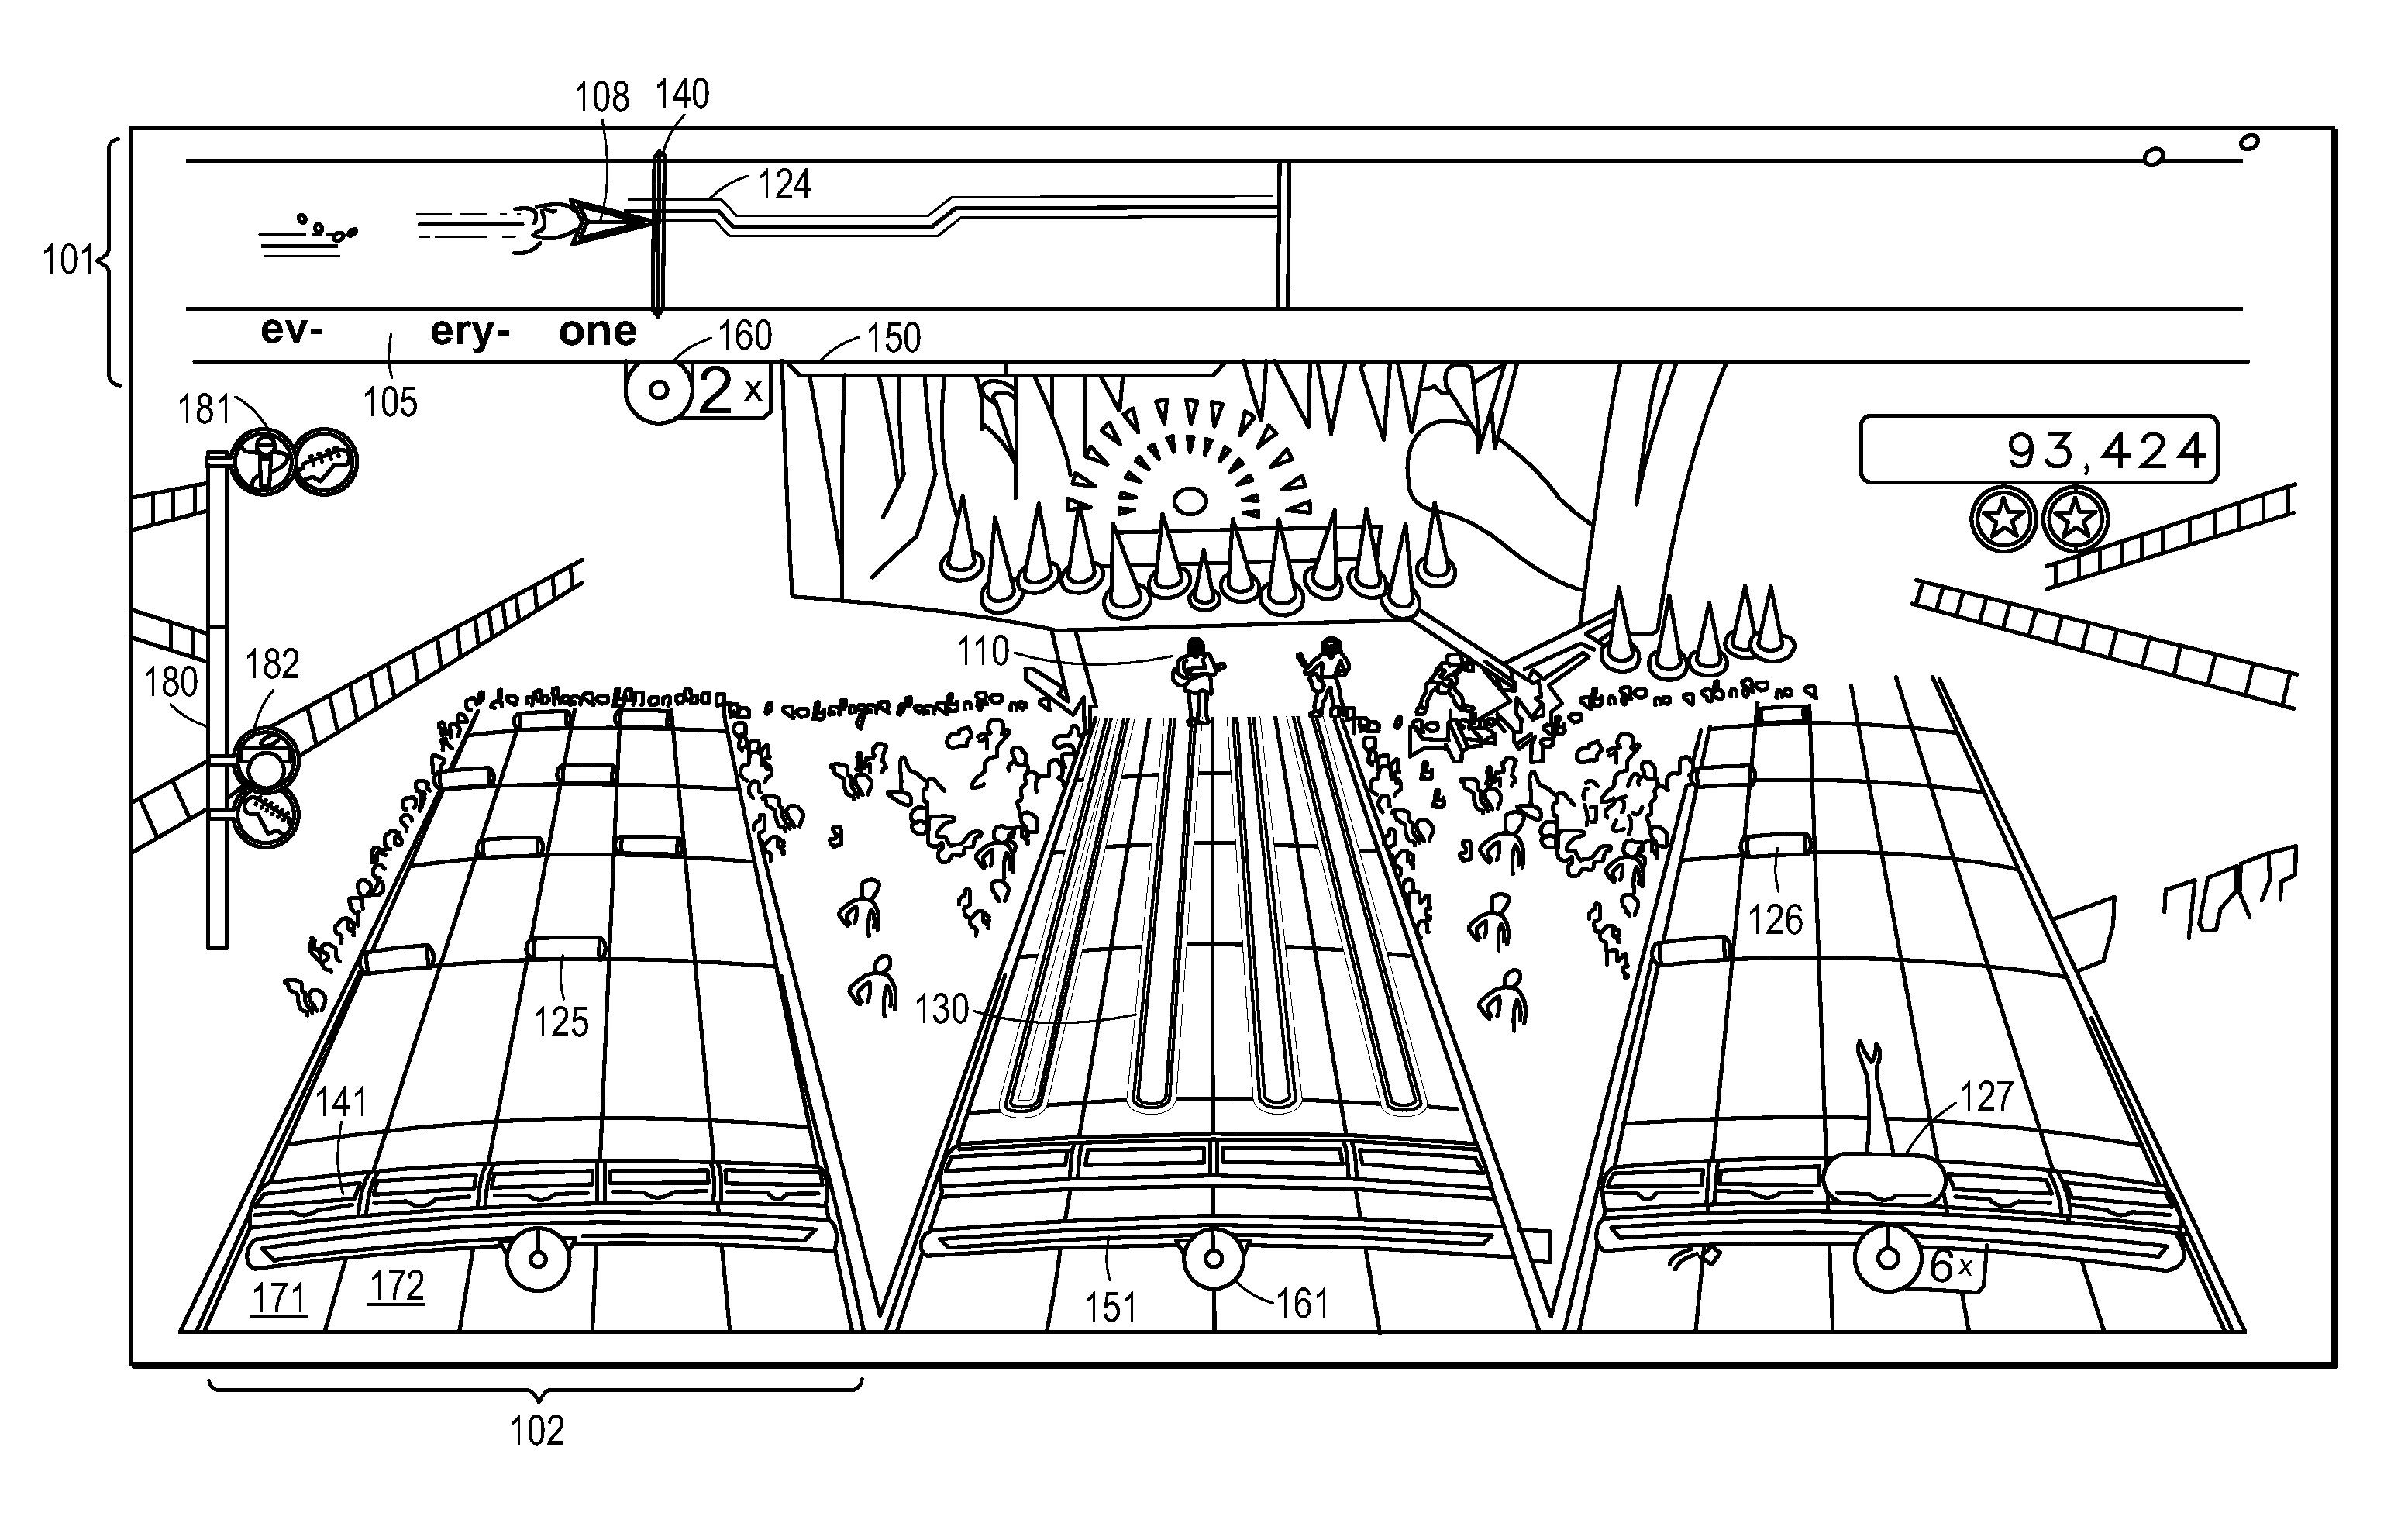 Systems and methods for simulating a rock band experience